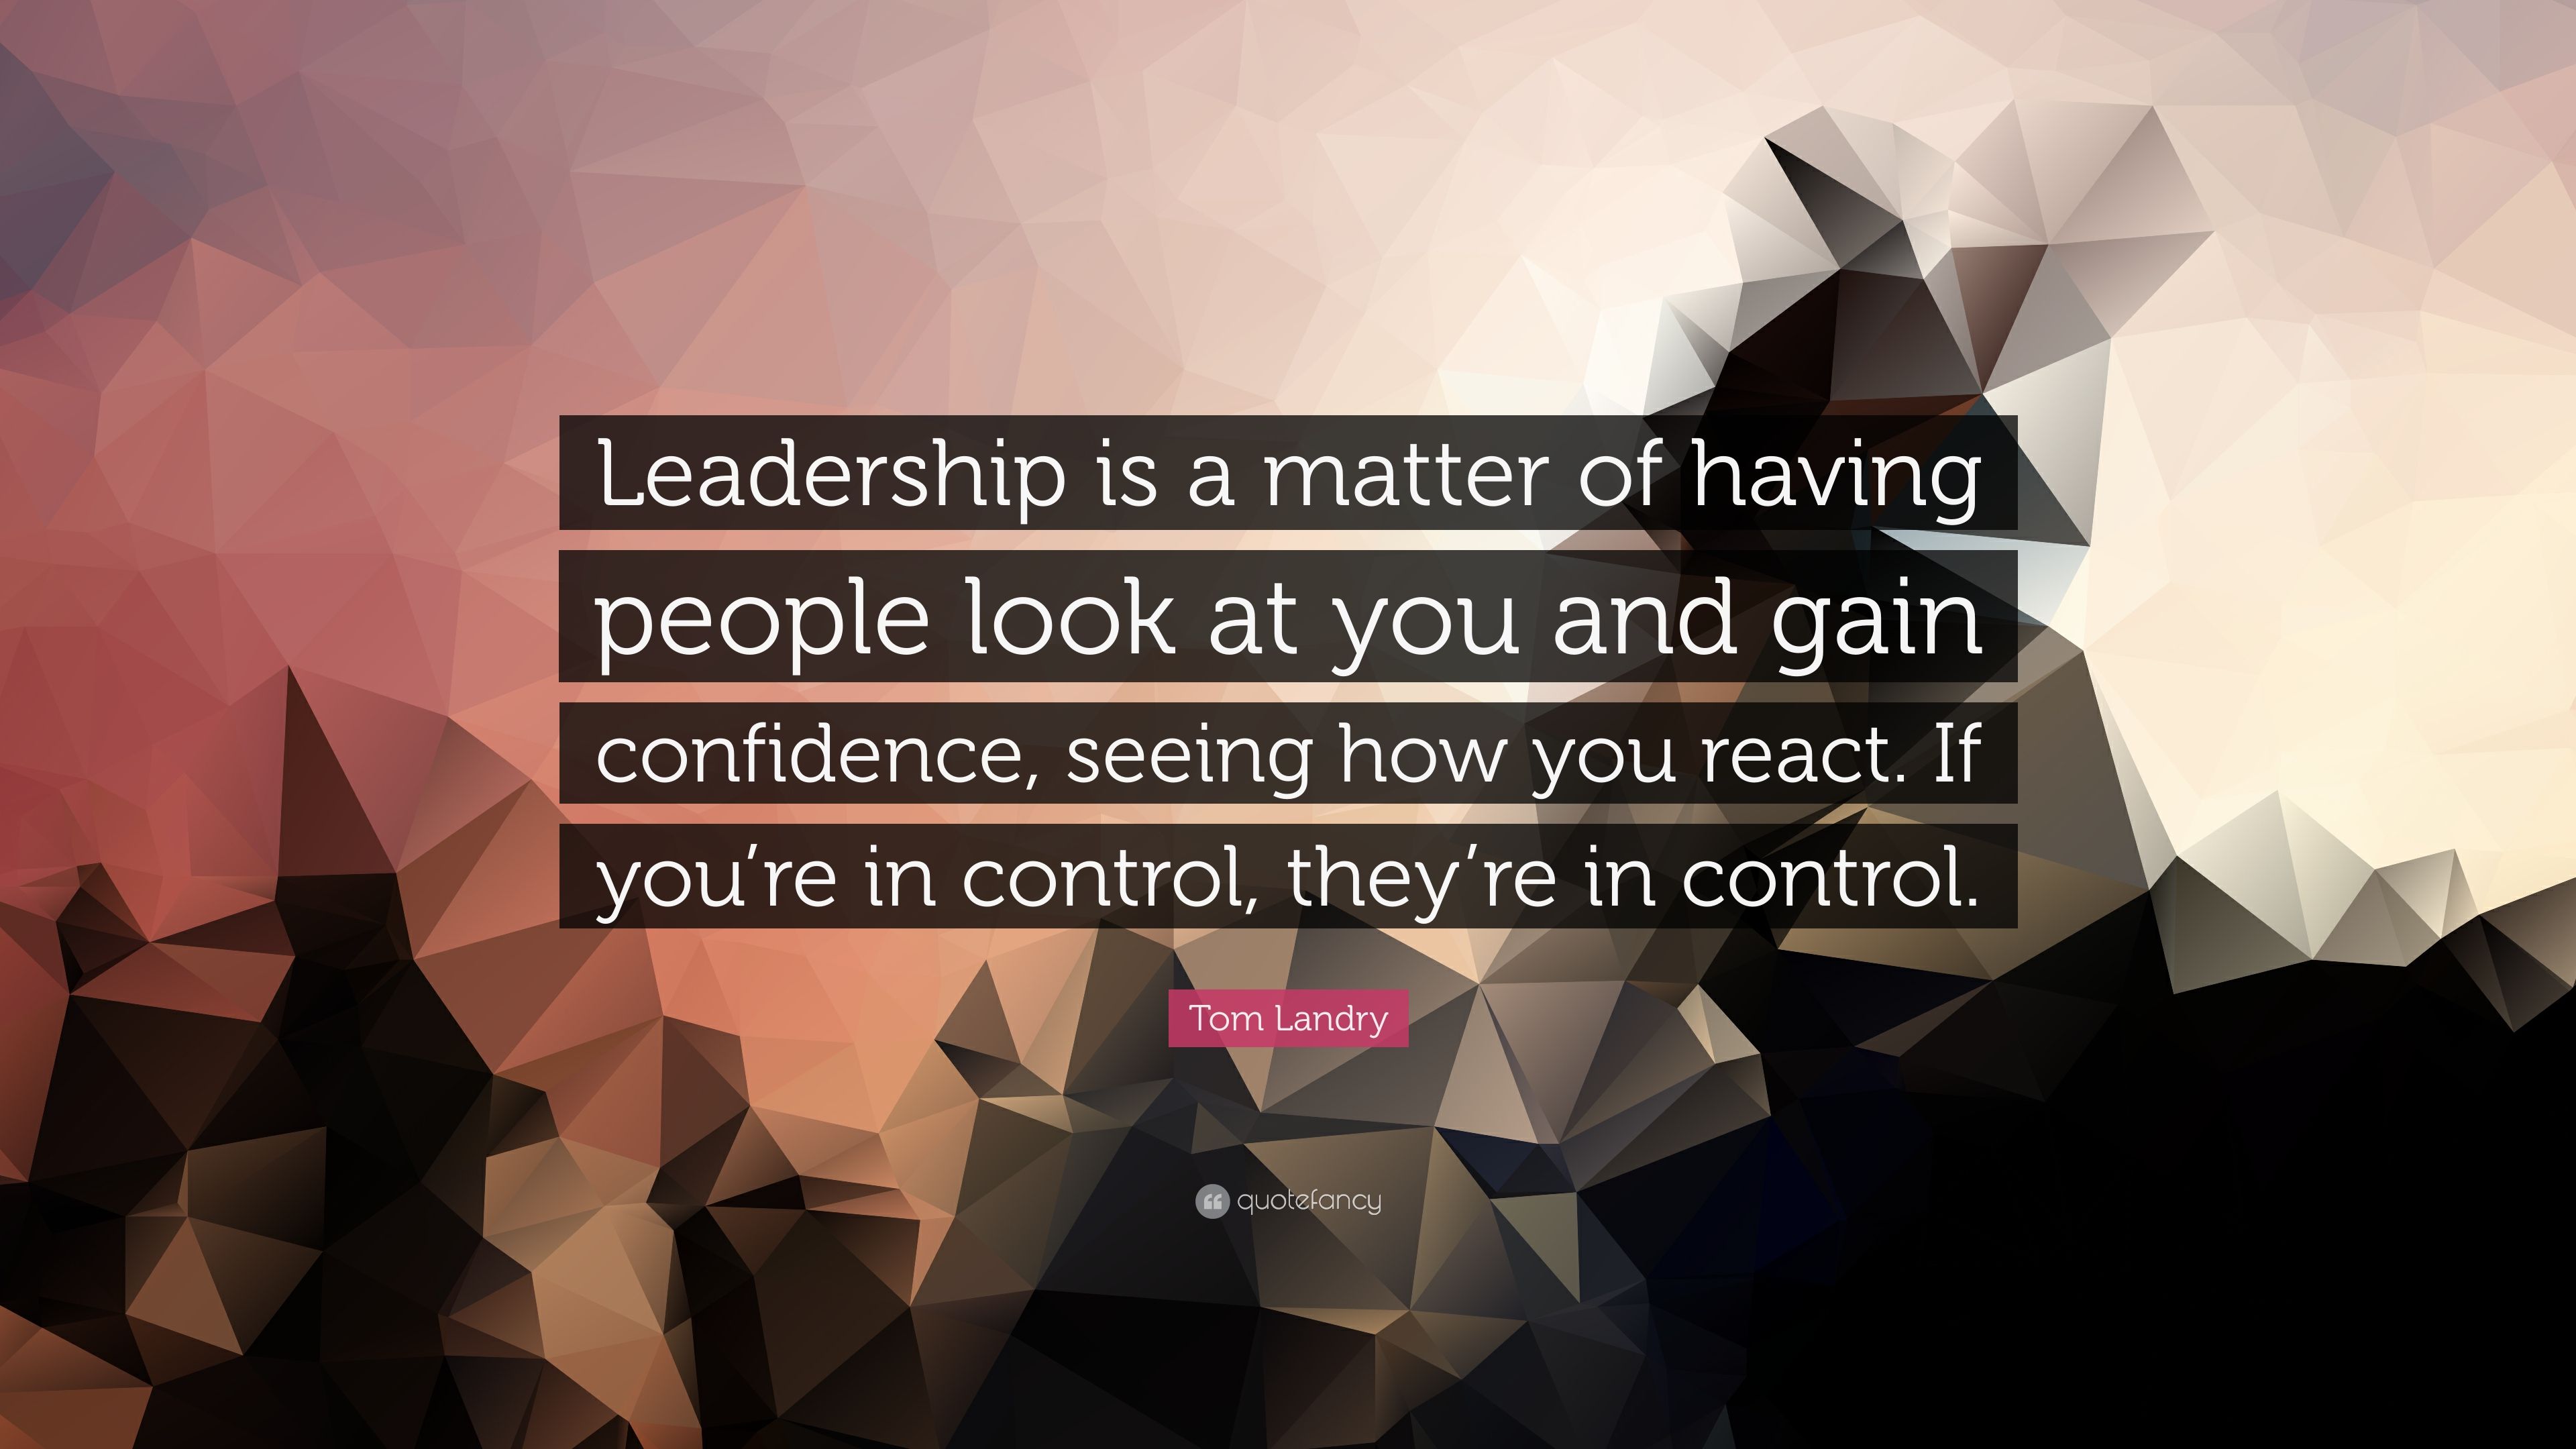 Tom Landry Quote: “Leadership is a matter of having people look at ...